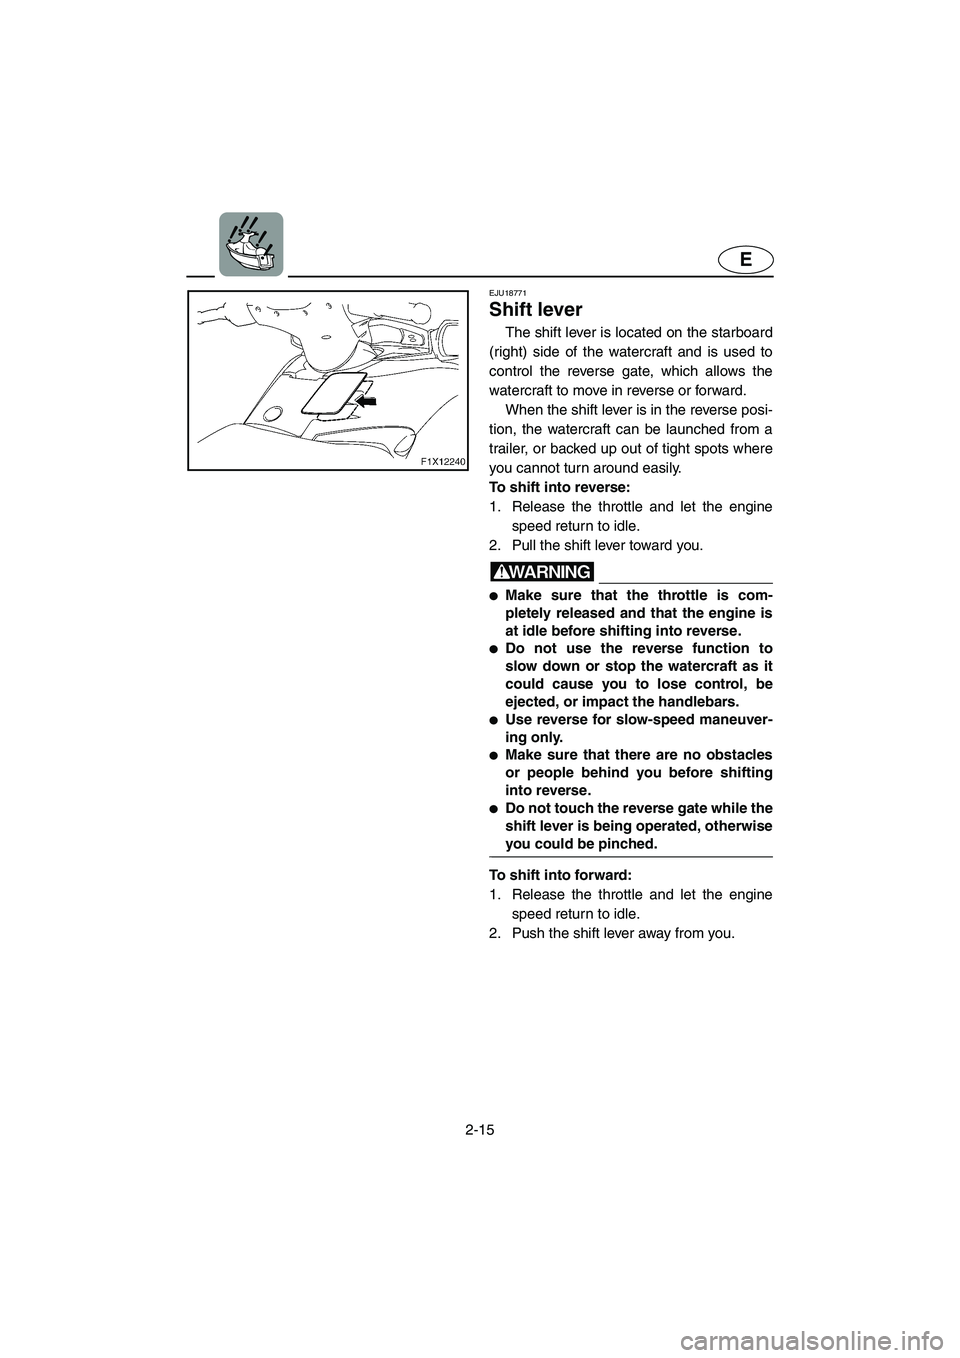 YAMAHA FX HO 2006  Owners Manual 2-15
E
EJU18771 
Shift lever
The shift lever is located on the starboard
(right) side of the watercraft and is used to
control the reverse gate, which allows the
watercraft to move in reverse or forwa